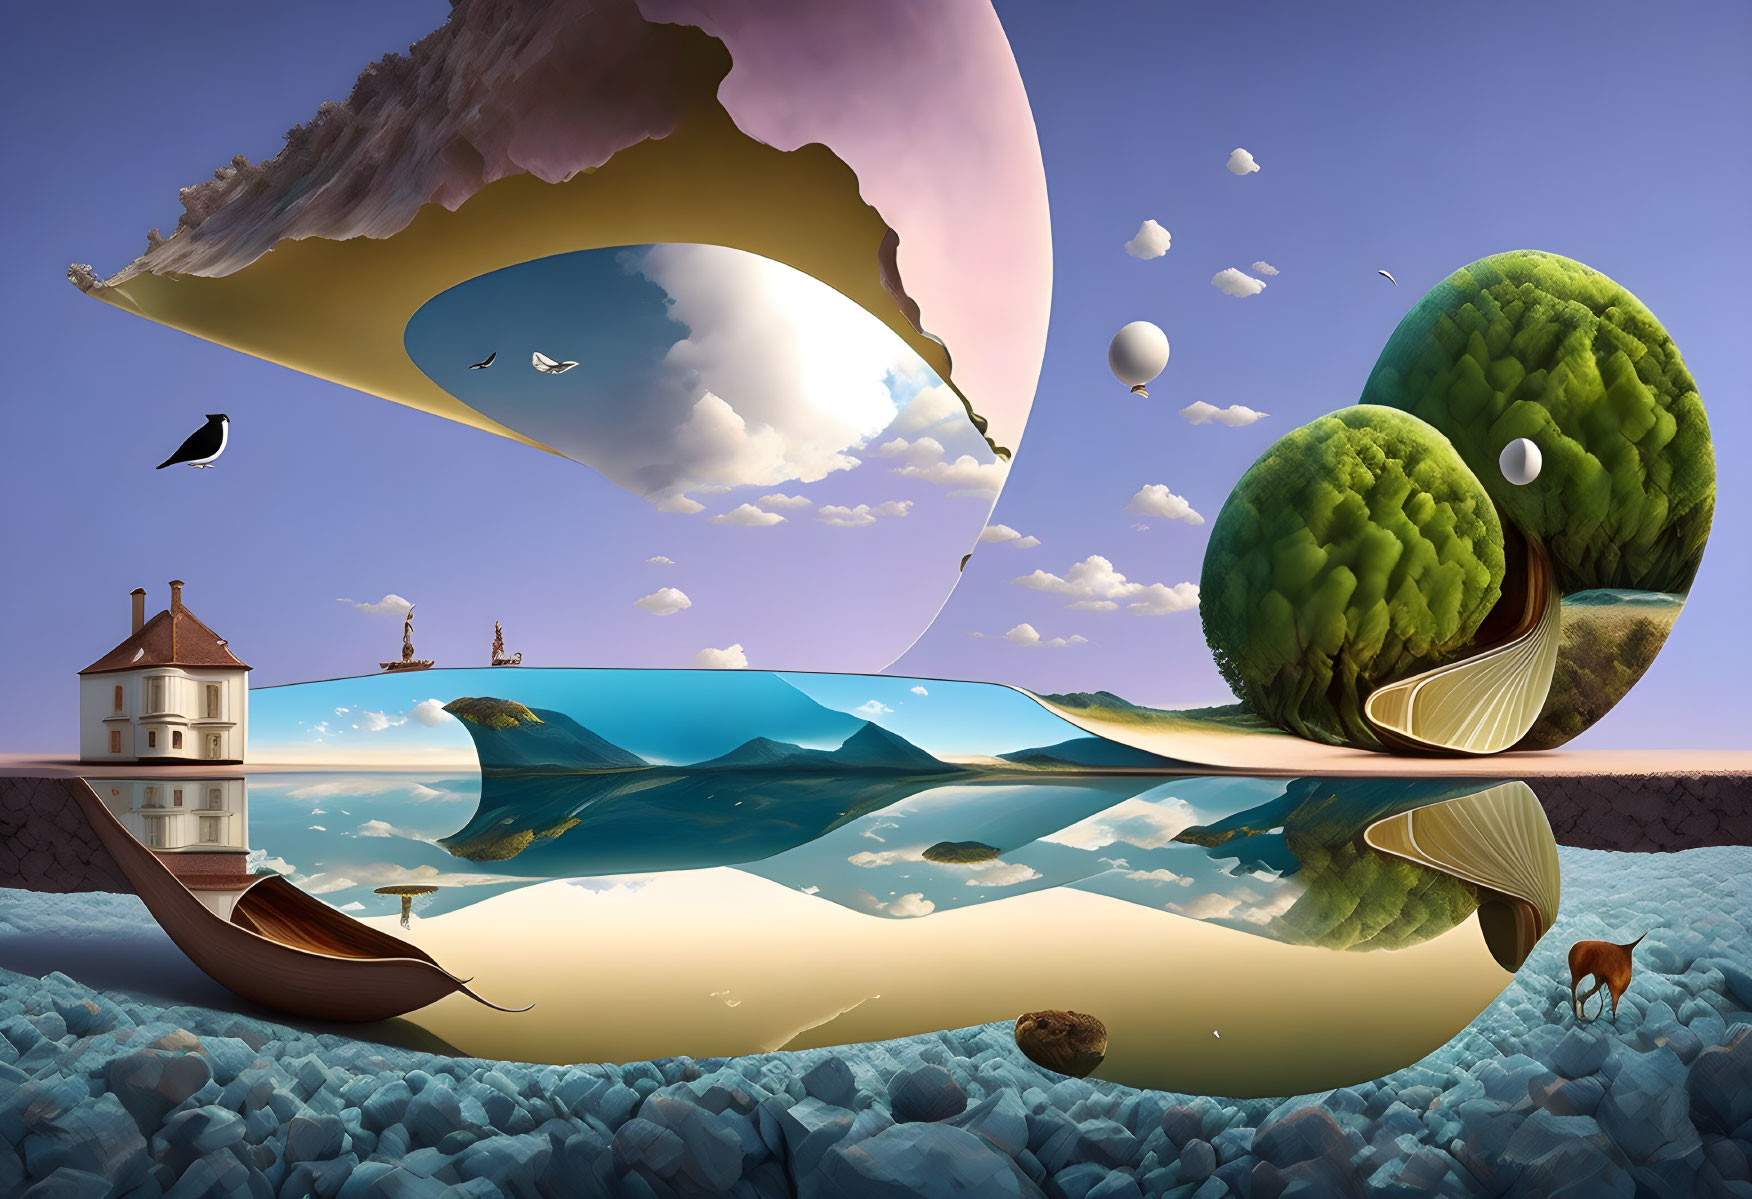 Surreal floating island with house, boat, submerged trees, birds, and lone deer